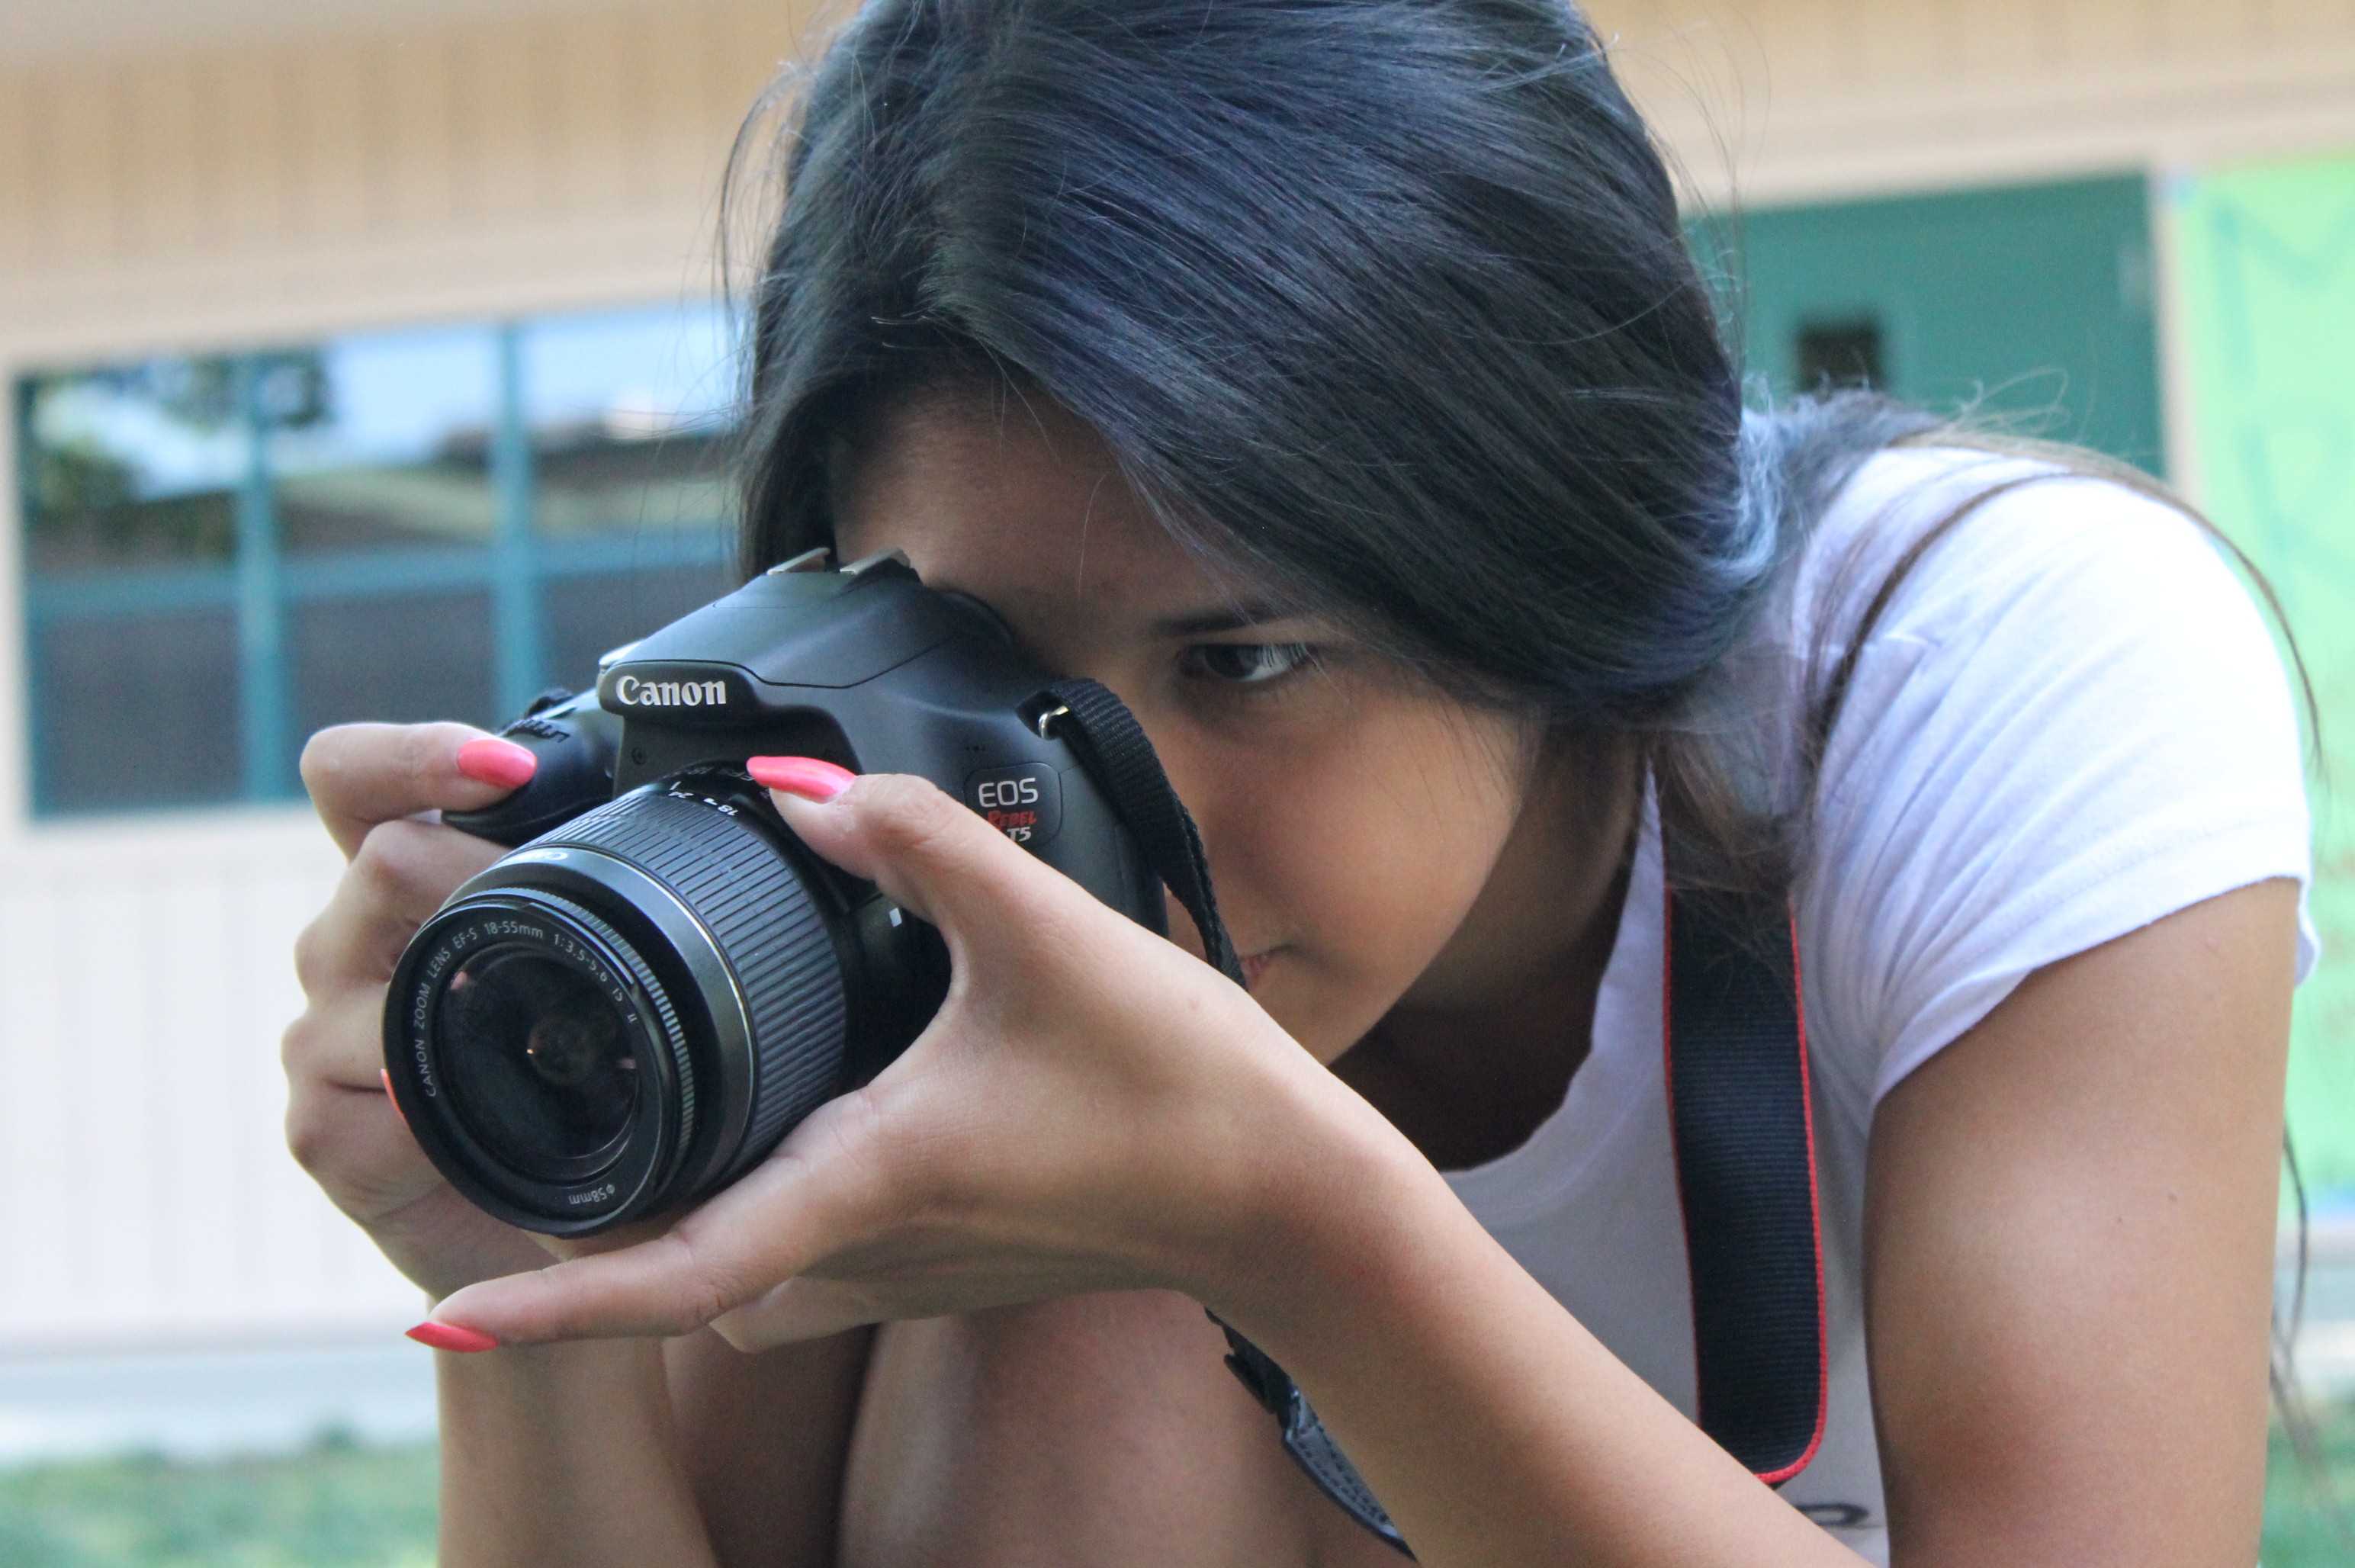 CAPTURE IT ALL: Since her photography project is due, sophomore Leah Thomas takes photos during her first period class on April 27. “You can be creative of what you can do and follow the strict rules of taking photos,” said Thomas. Photo by Chia Vang